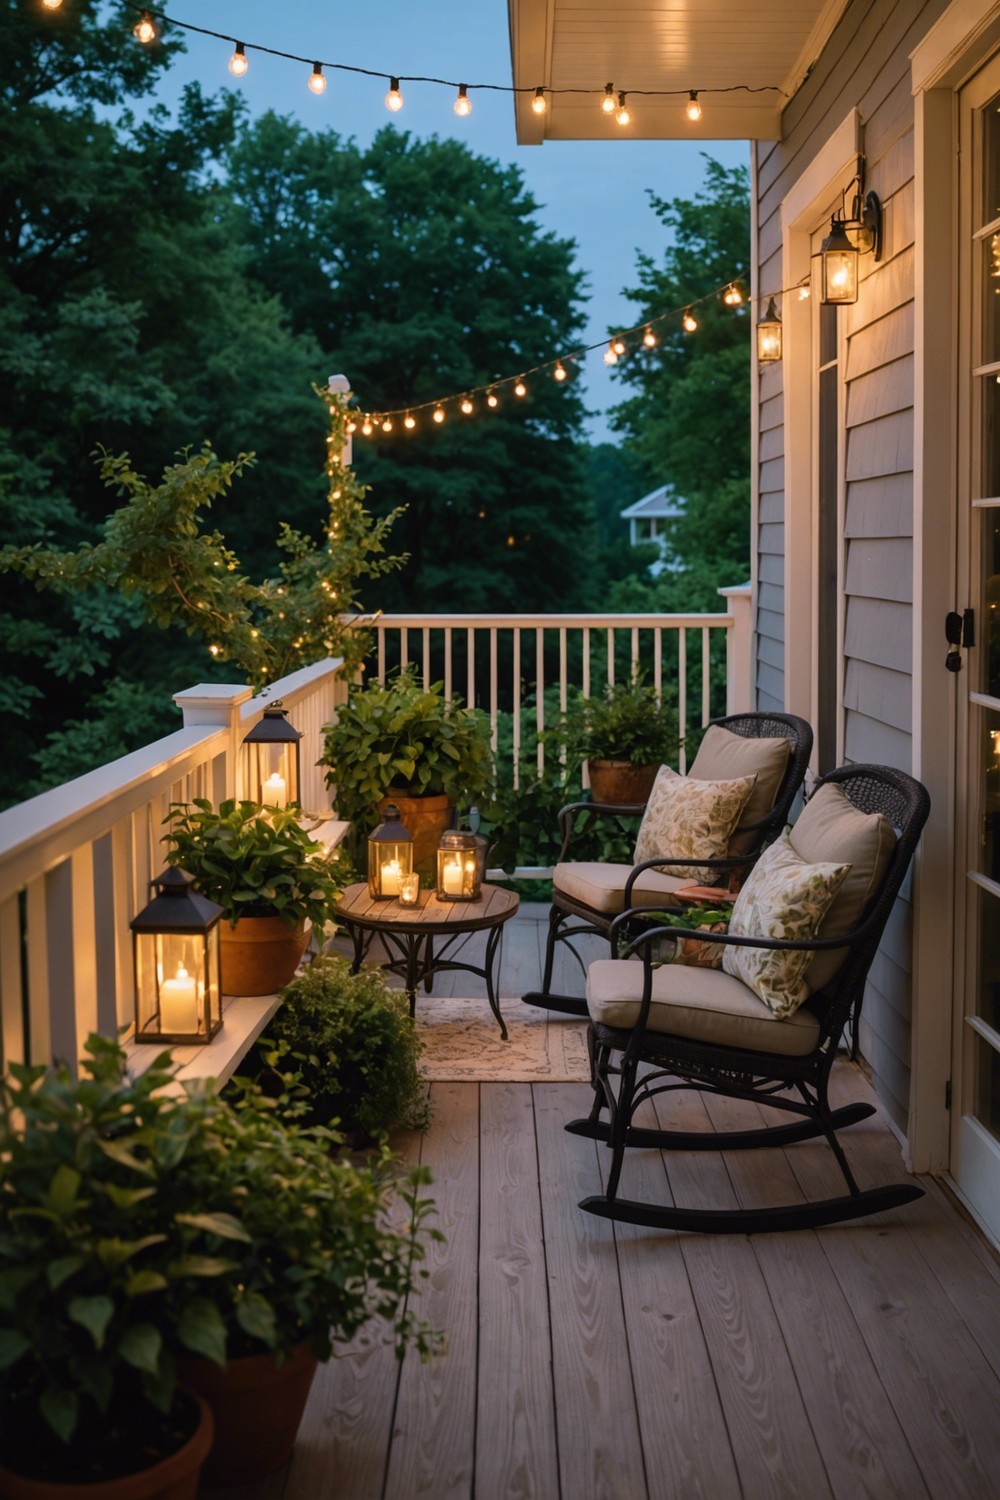 Create a Cozy Ambiance with String Lights